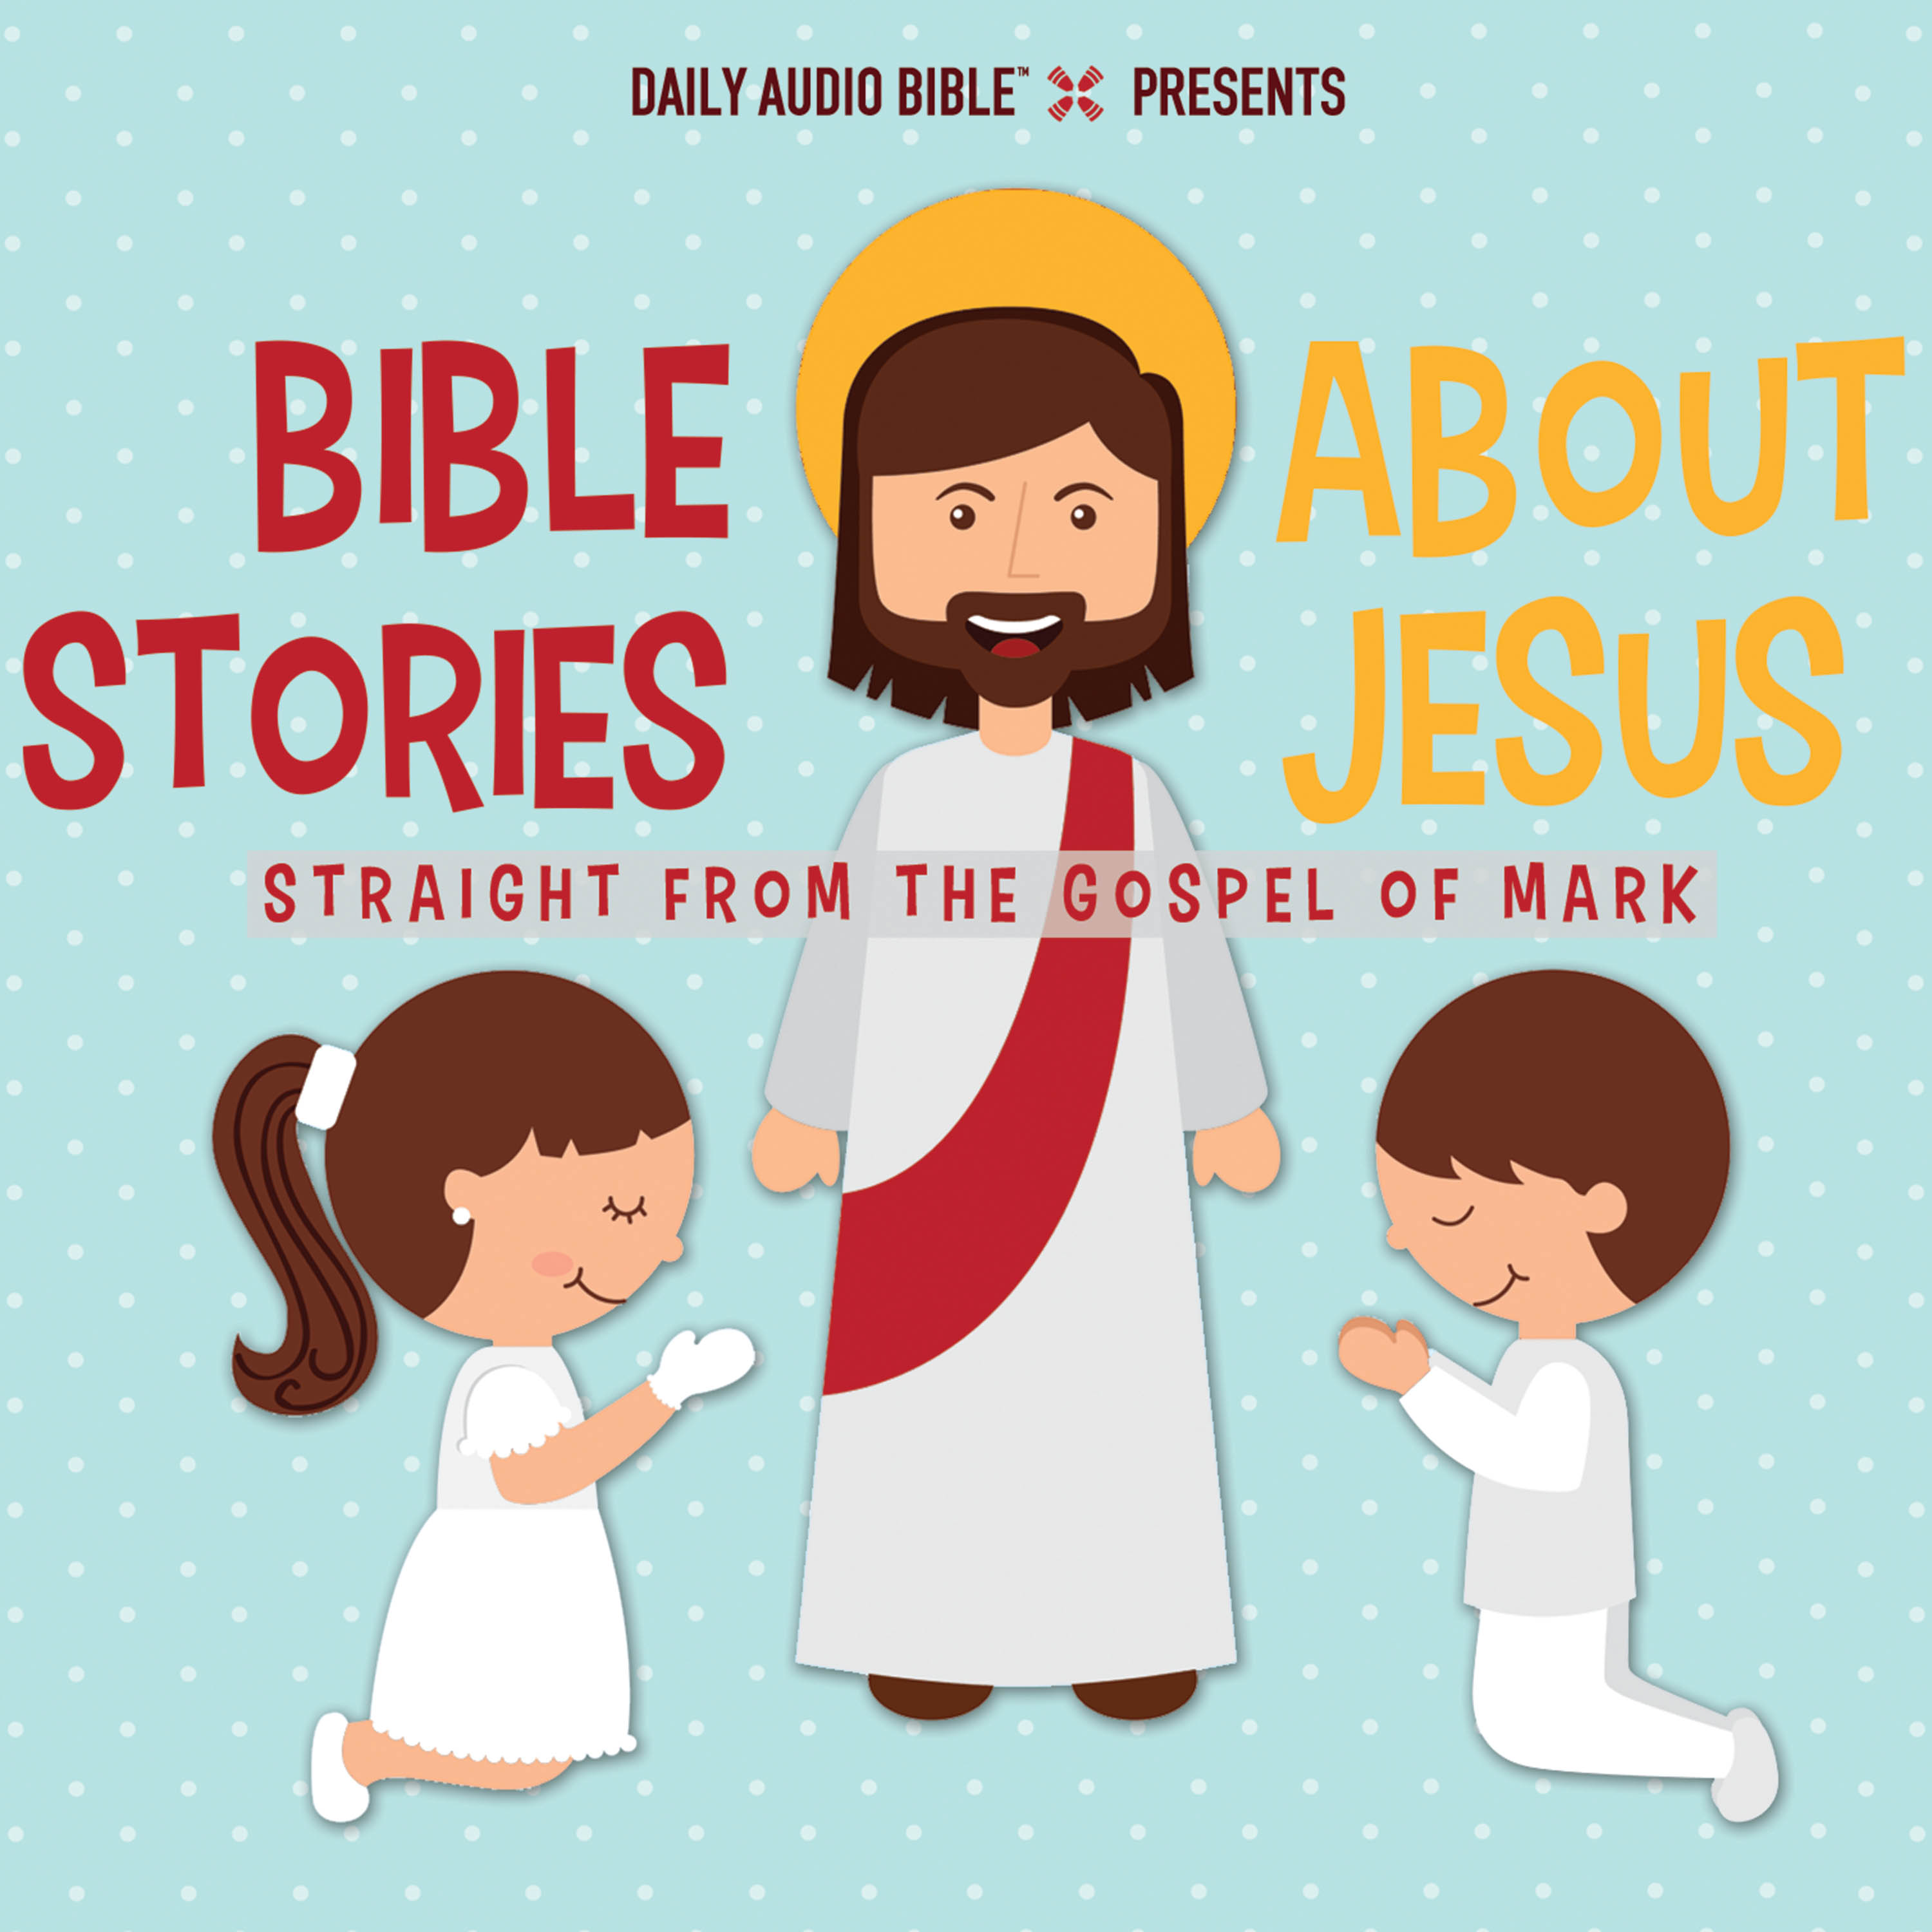 Bible Stories About Jesus | Daily Audio Bible